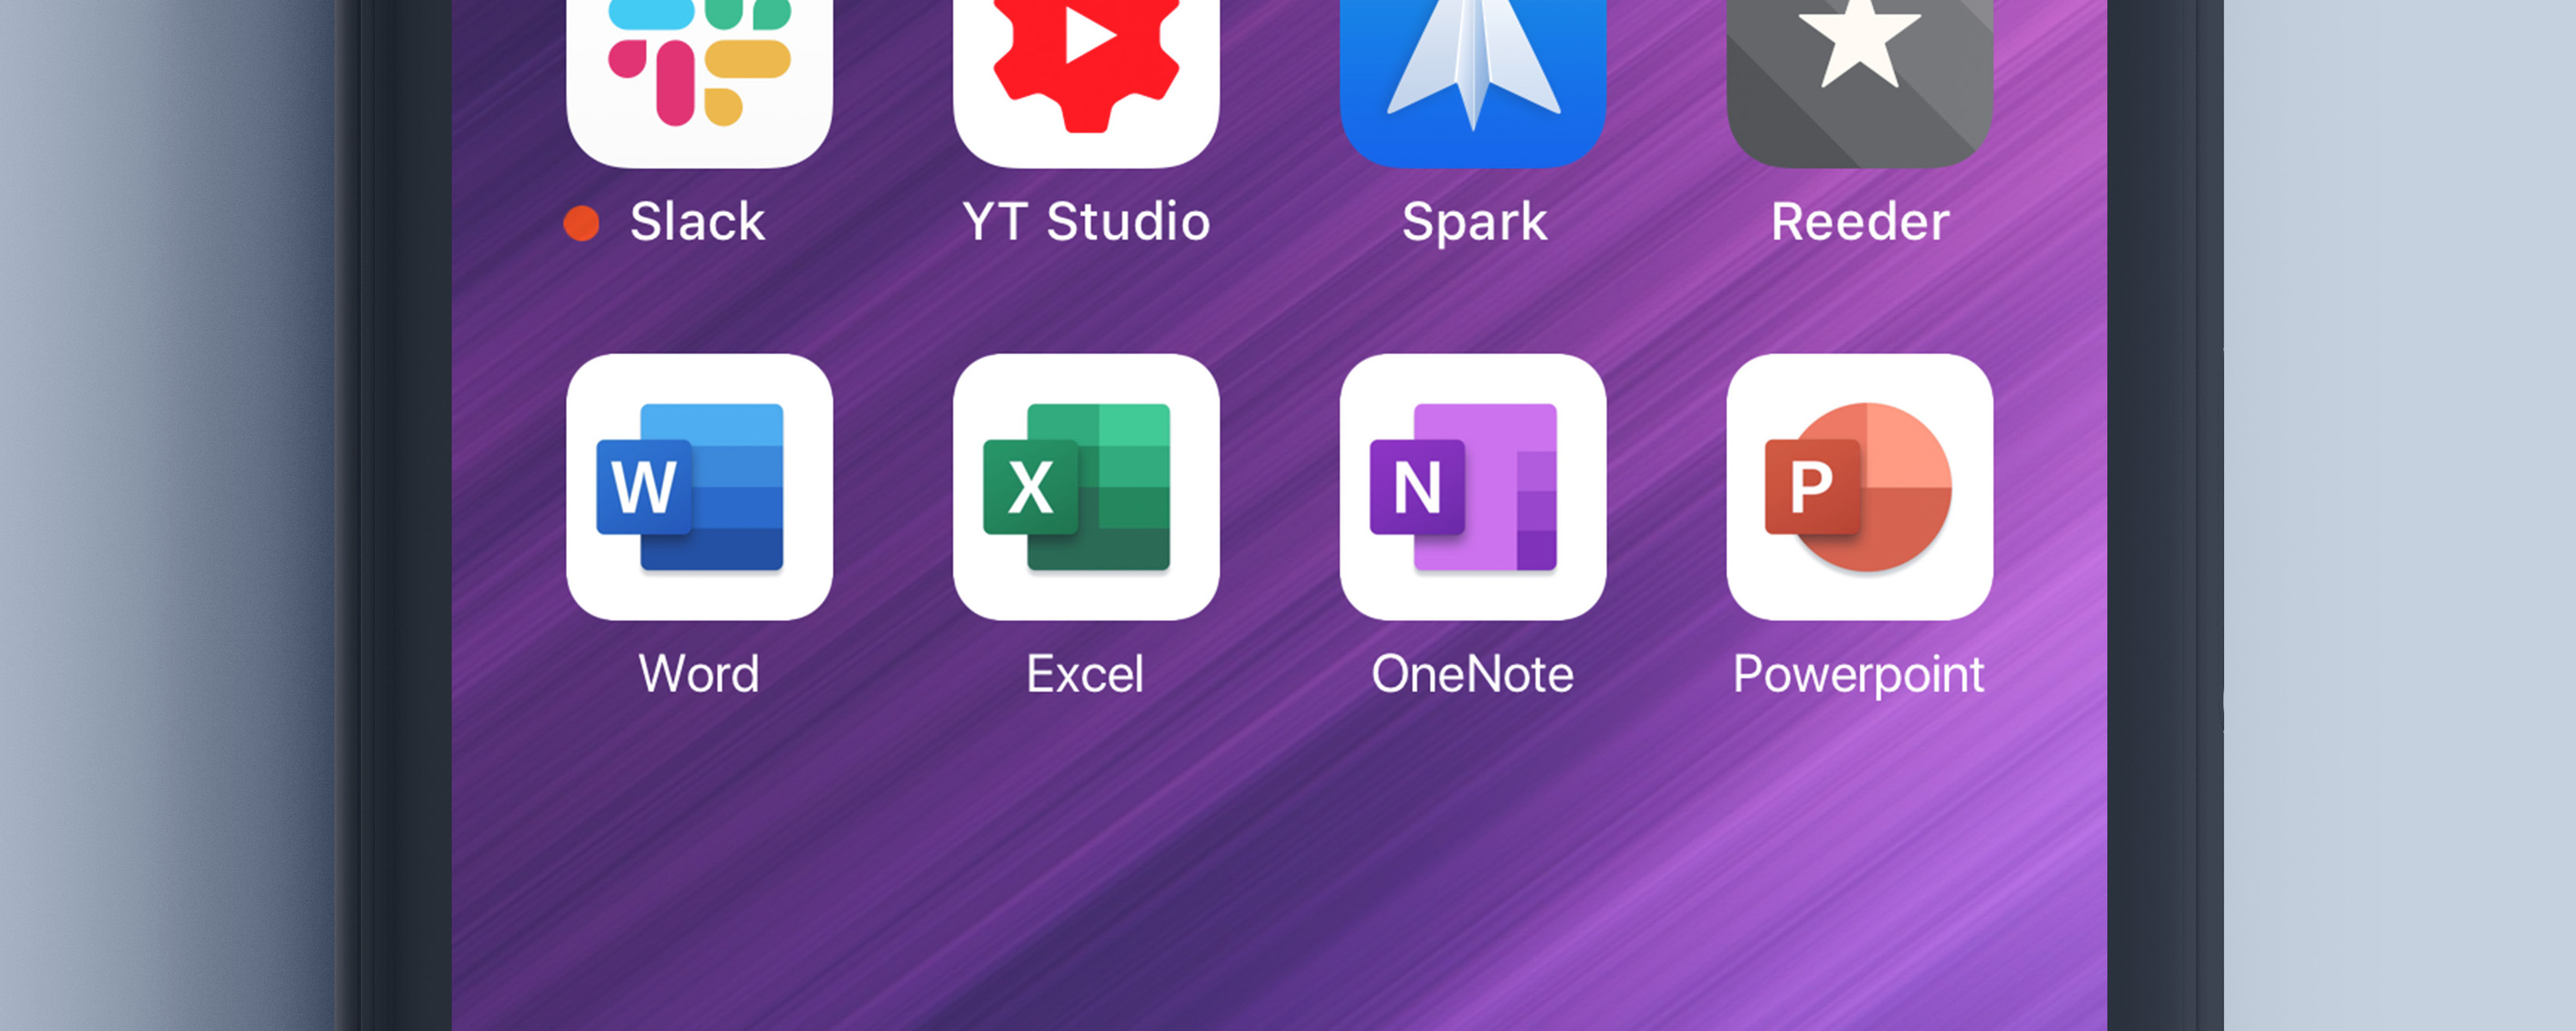 Mockup: New Microsoft Office Icons for iOS and Android